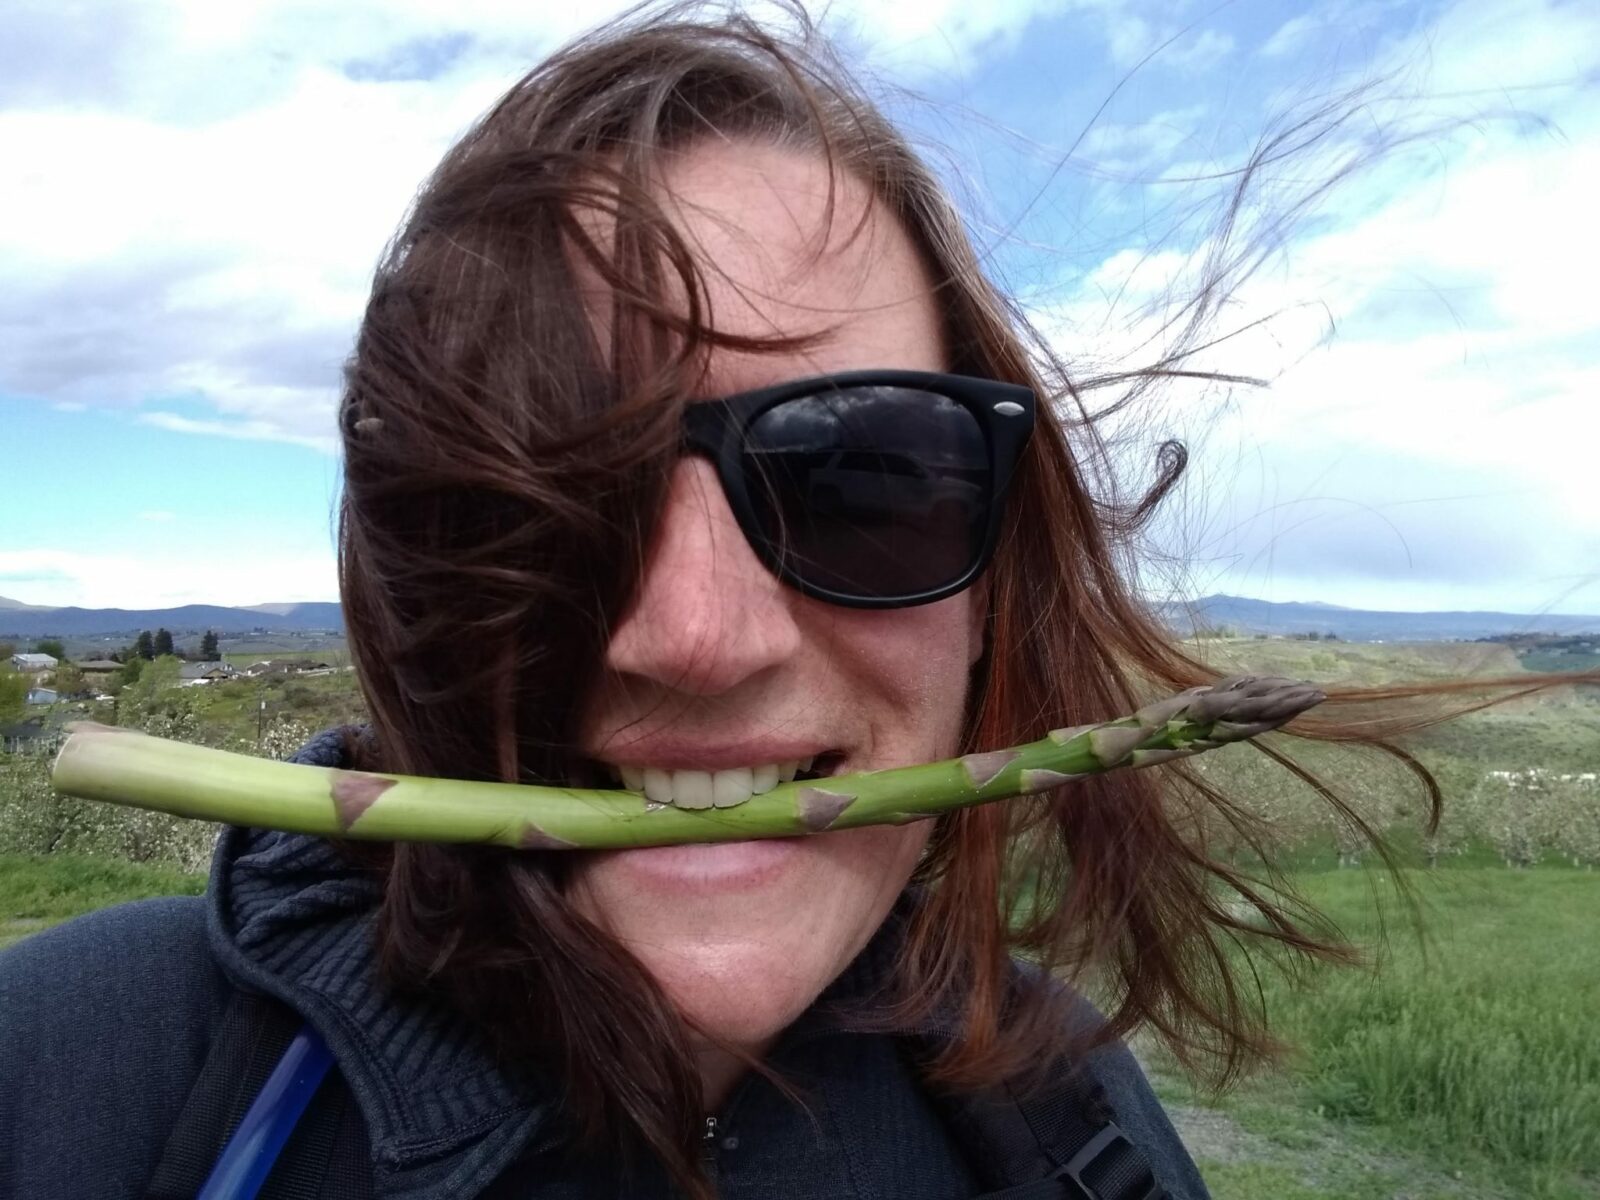 A woman wearing sunglasses is smiling and holding a single spear of asparagus in her mouth. The wind is blowing her hair from behind.